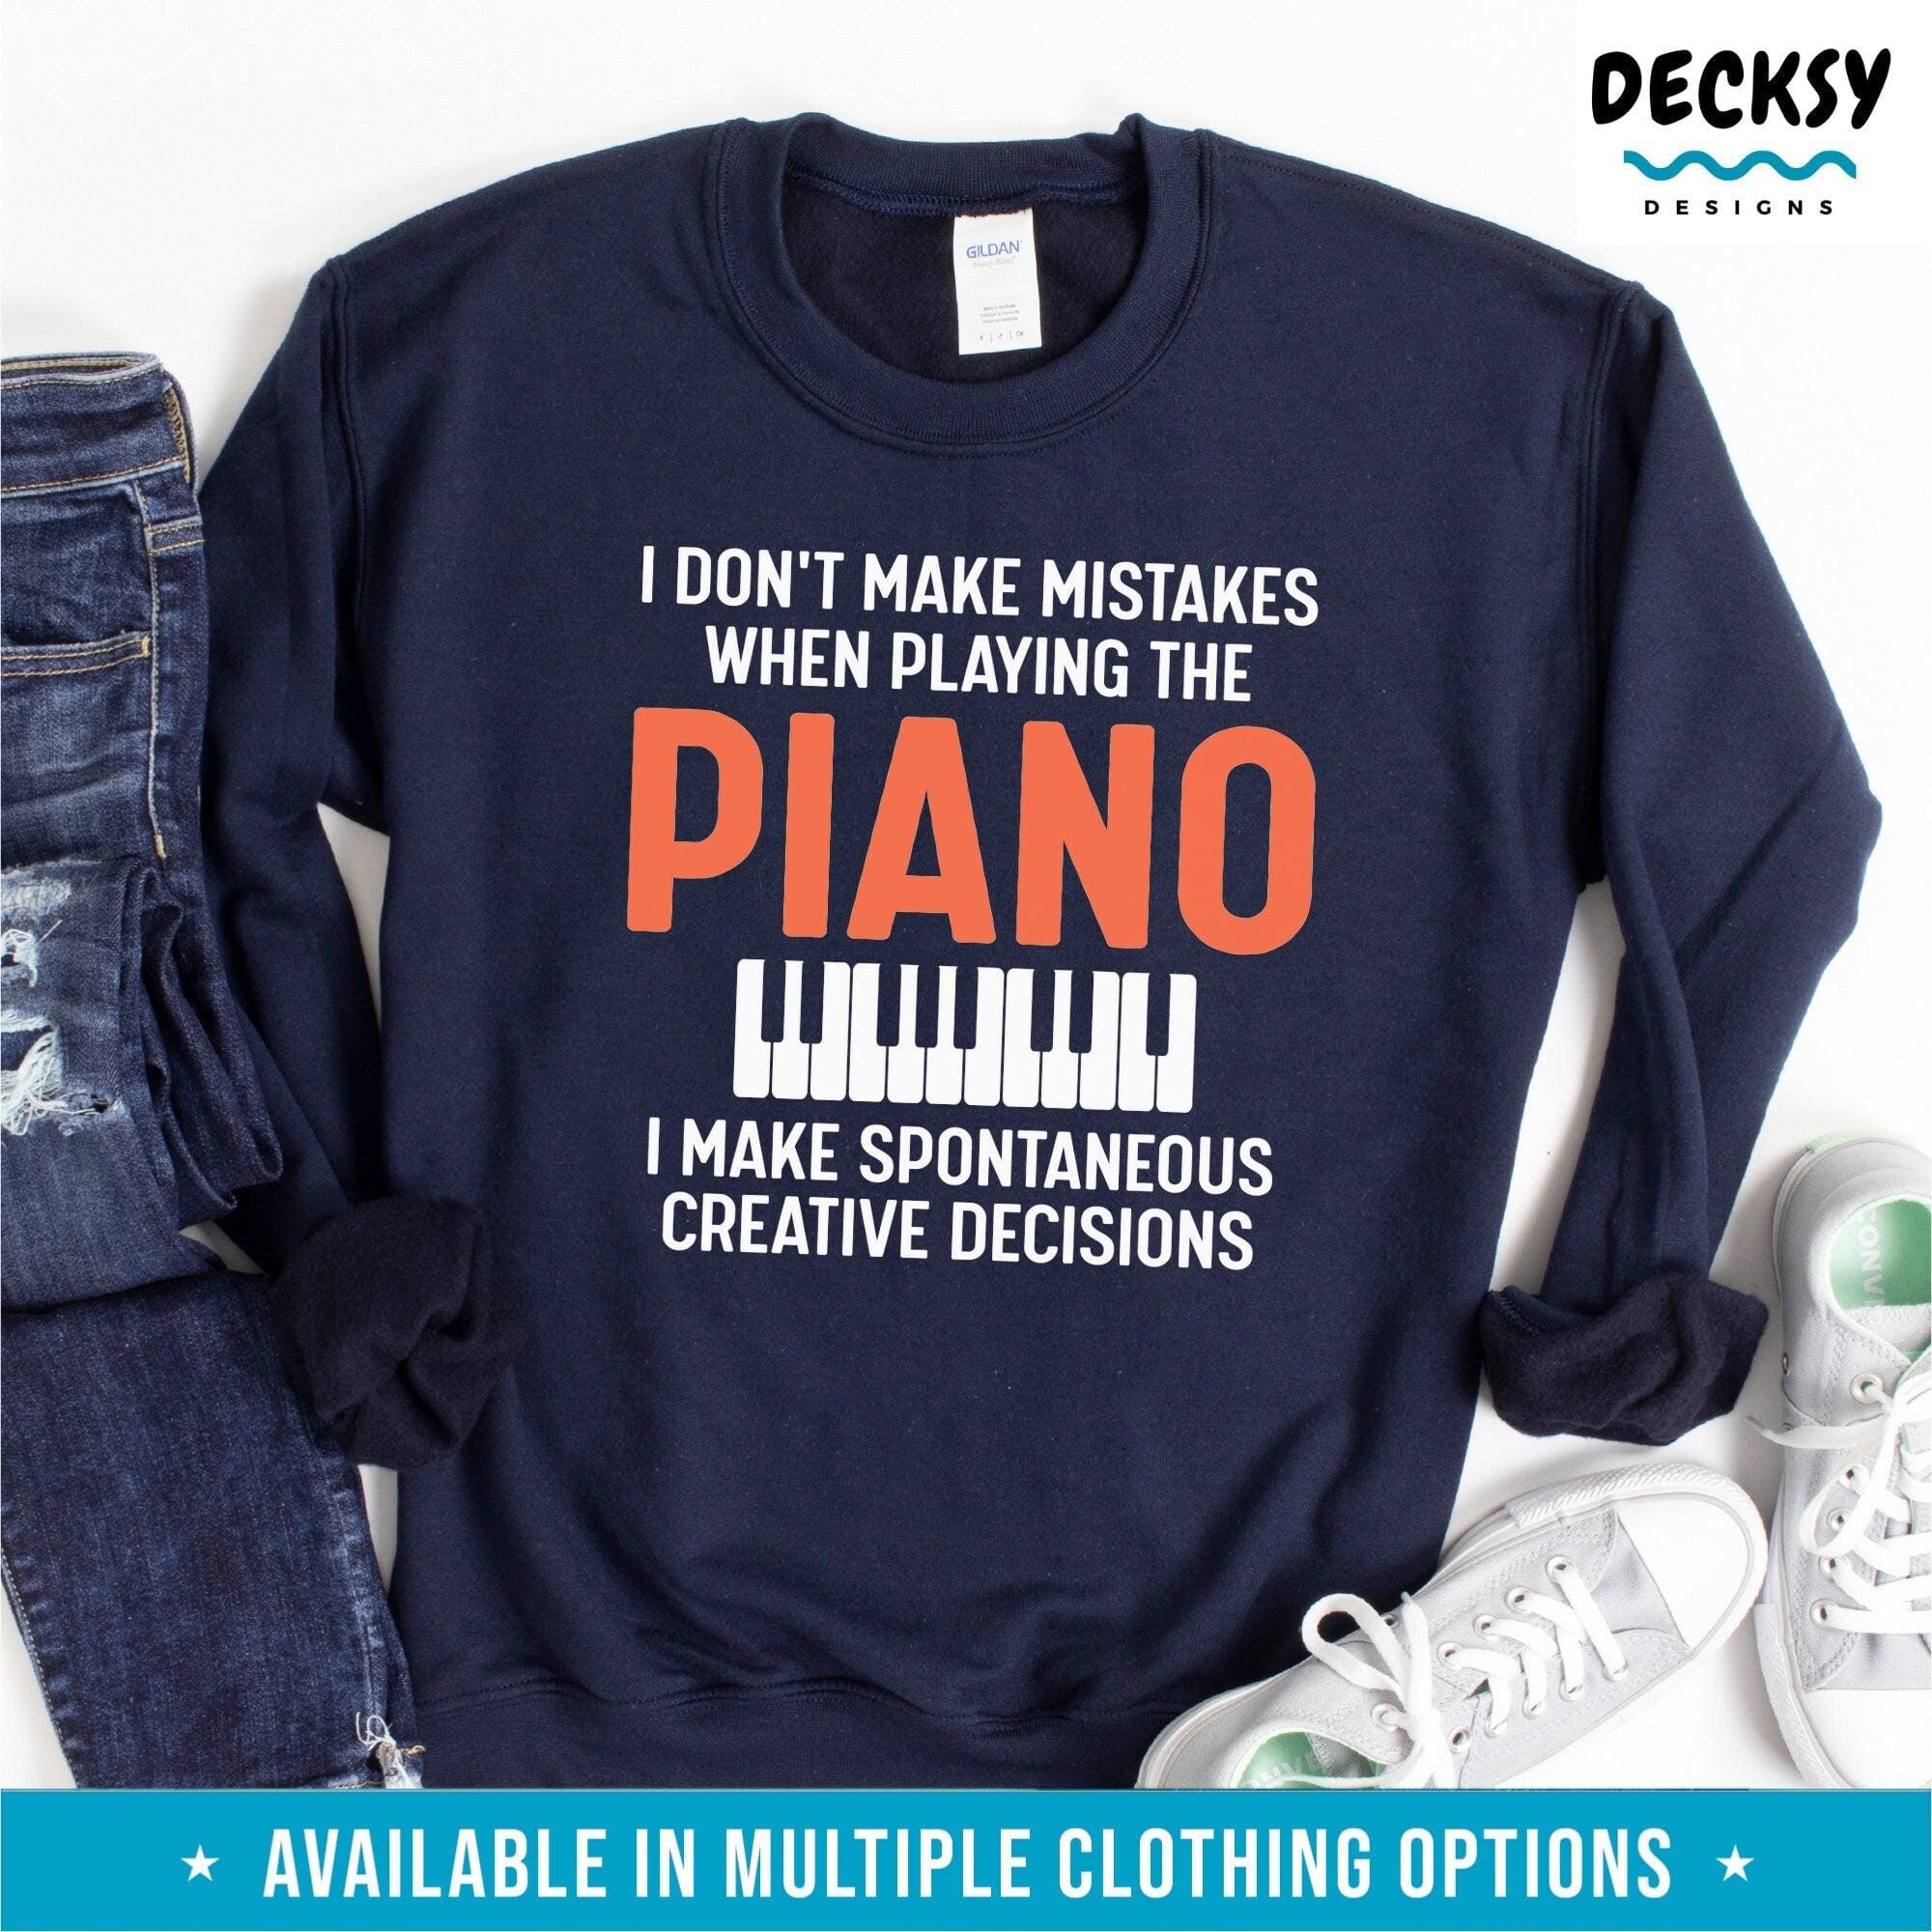 Pianist Shirt, Piano Teacher Gift-Clothing:Gender-Neutral Adult Clothing:Tops & Tees:T-shirts:Graphic Tees-DecksyDesigns